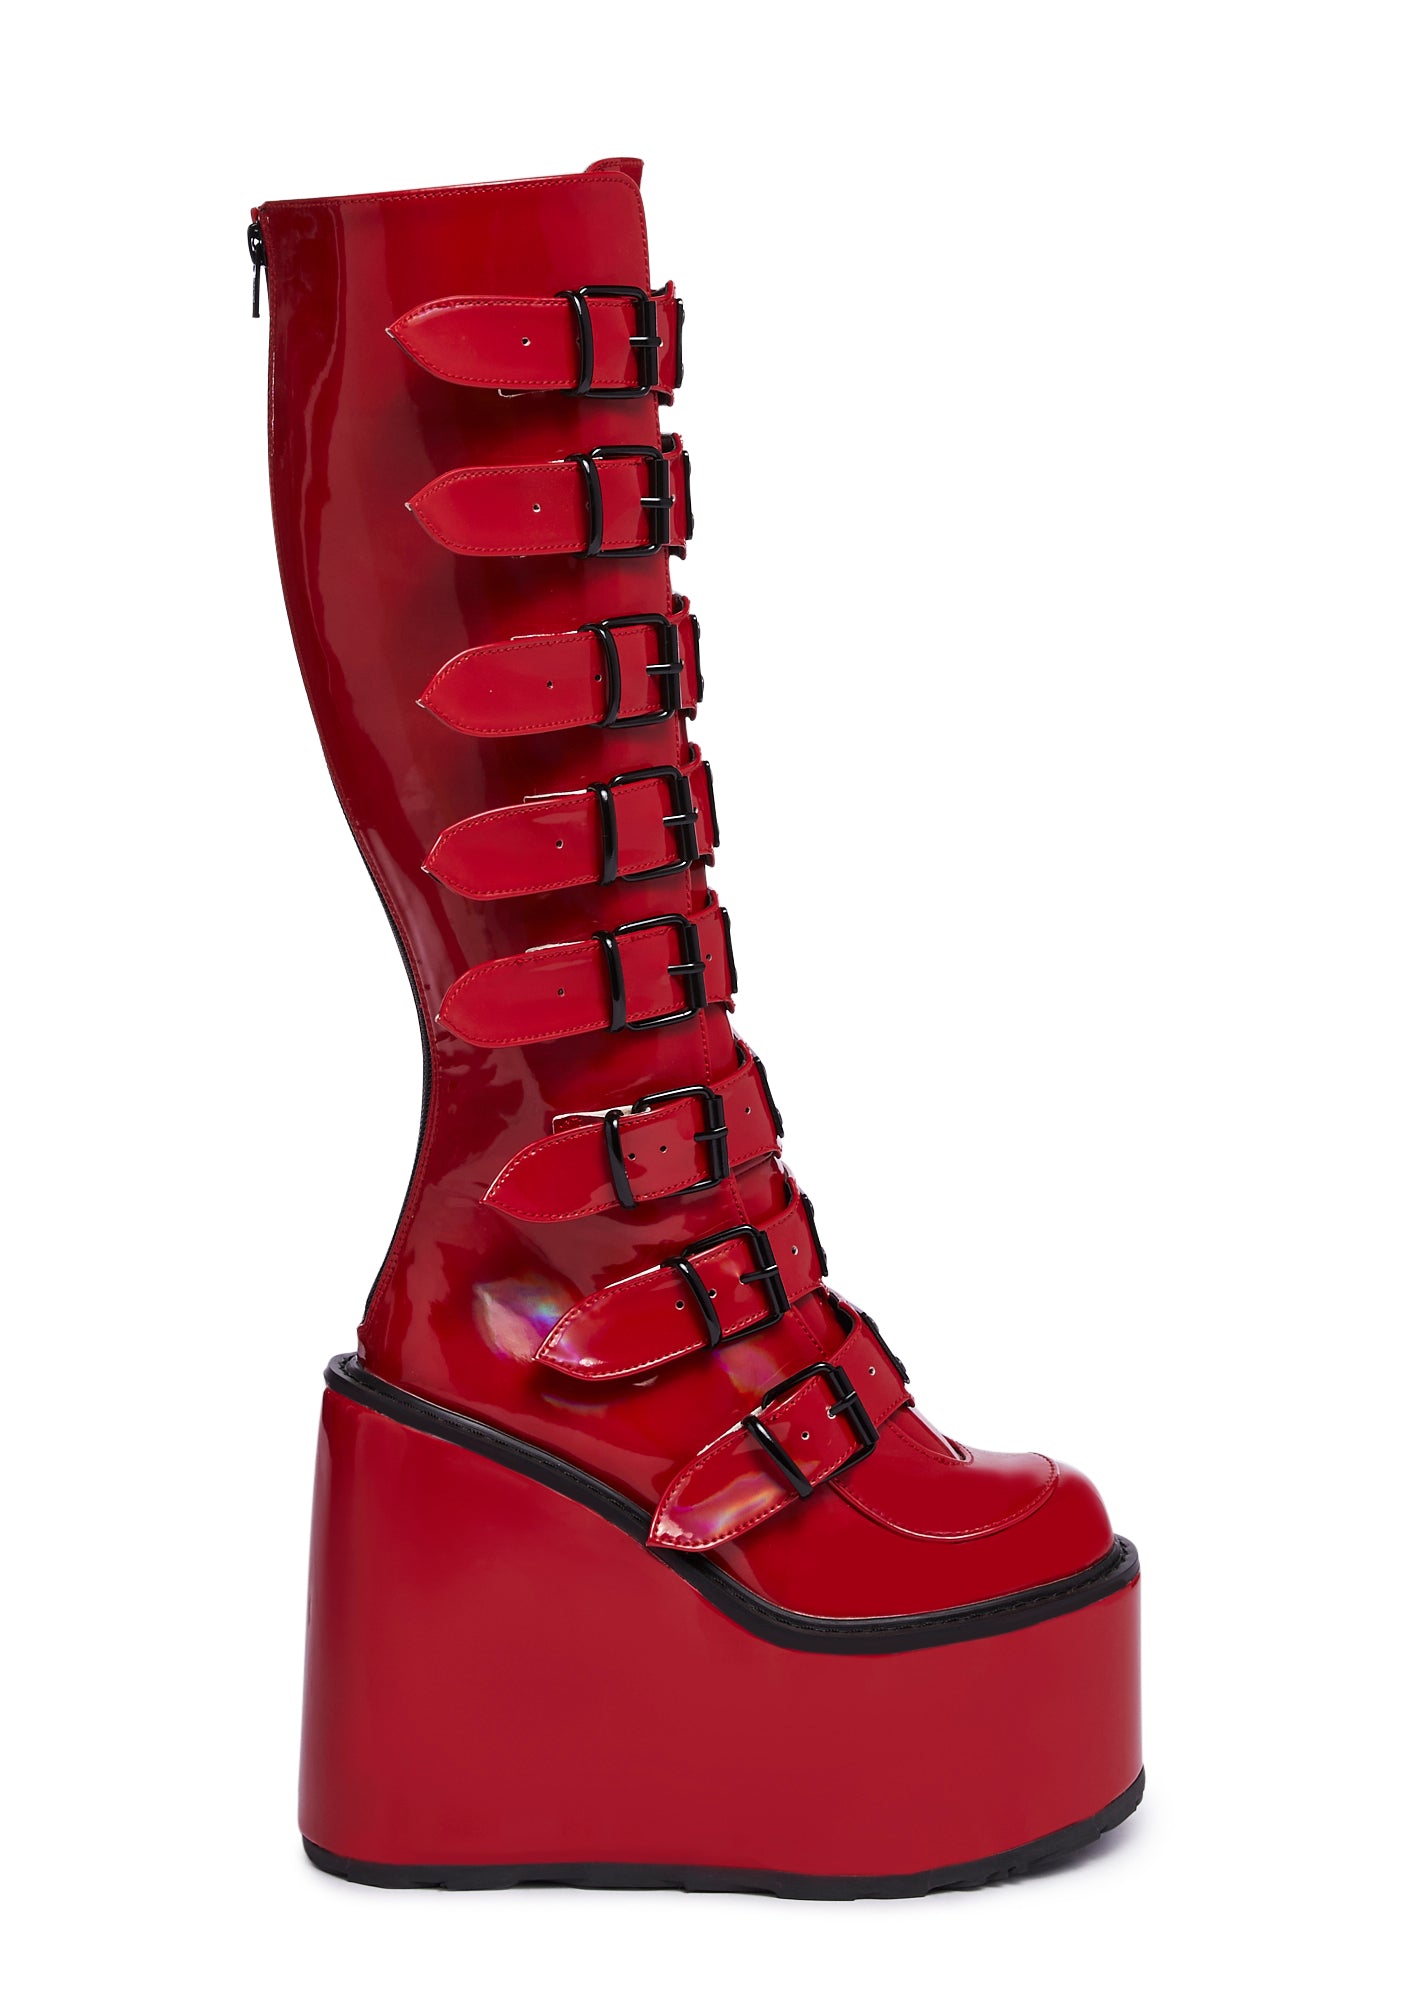 Demonia x Dolls Kill Swing-815 Boots - Red Holographic